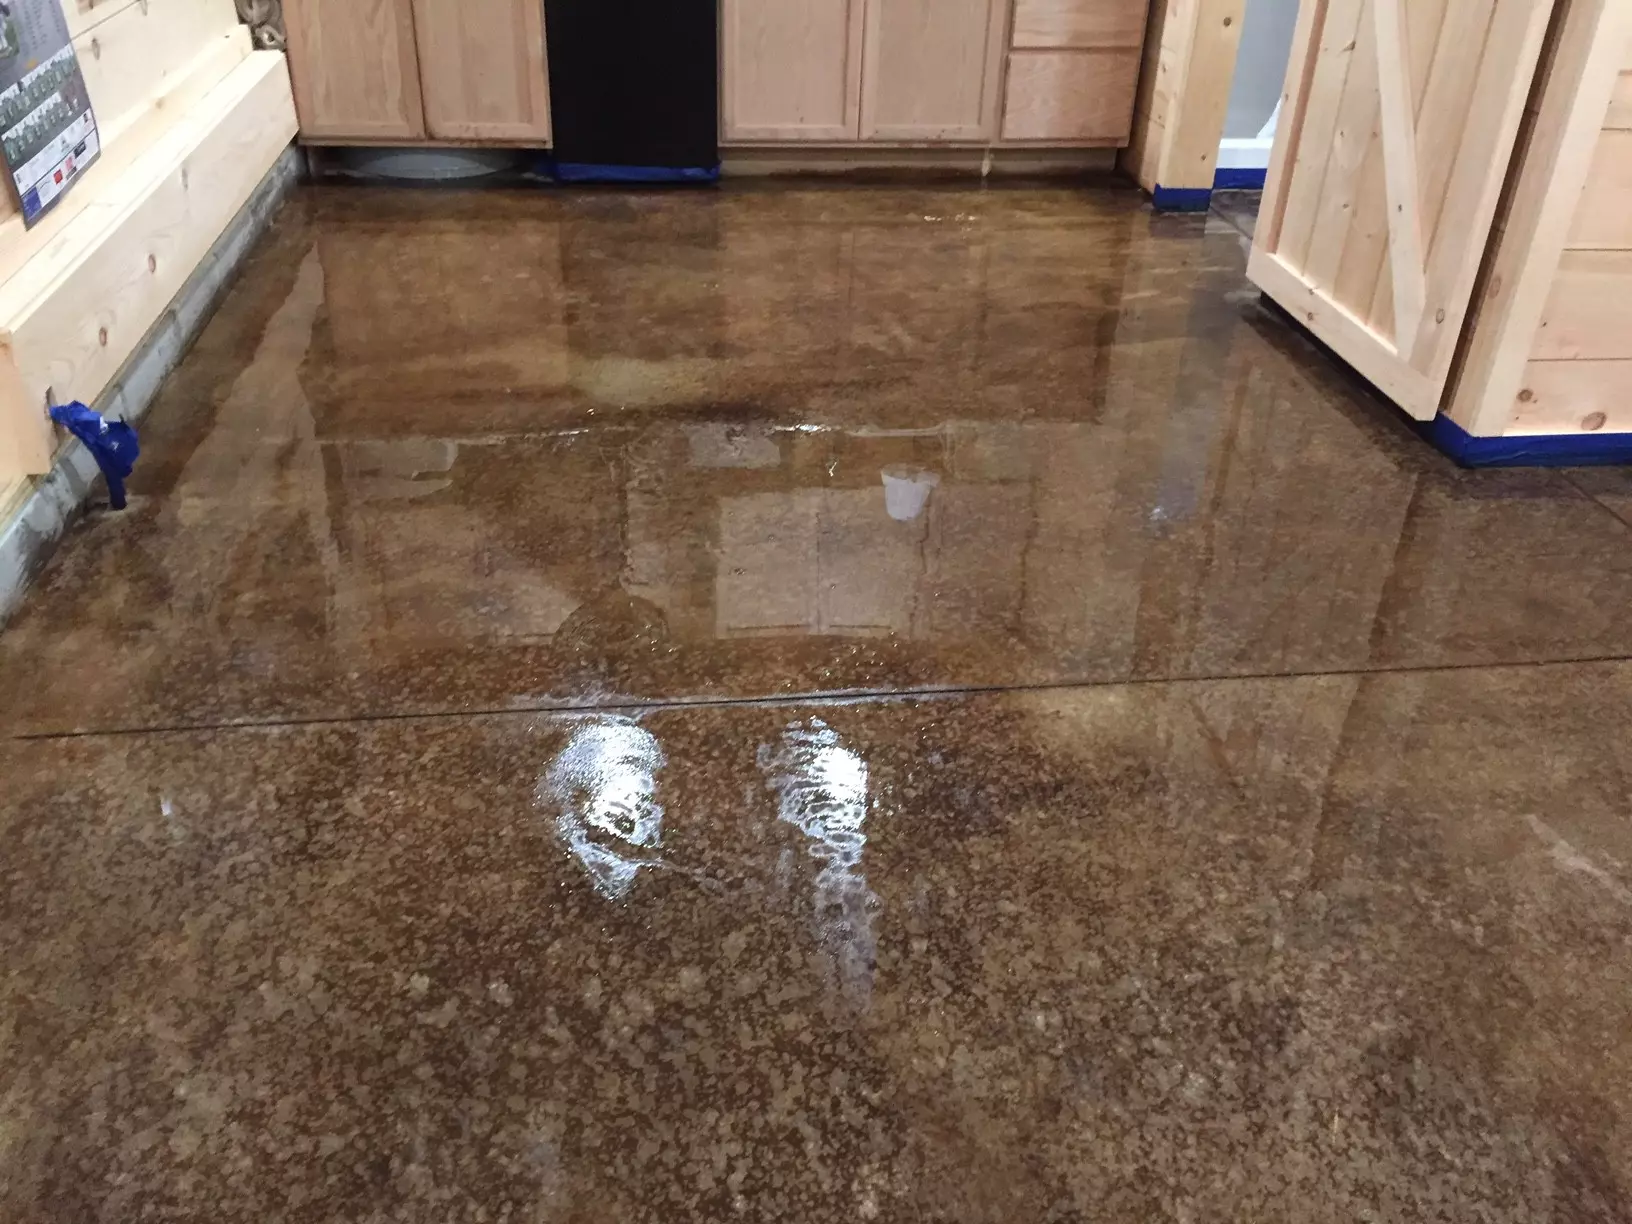 Acid Staining Our Concrete Floors - An Expensive Look At Little Cost!